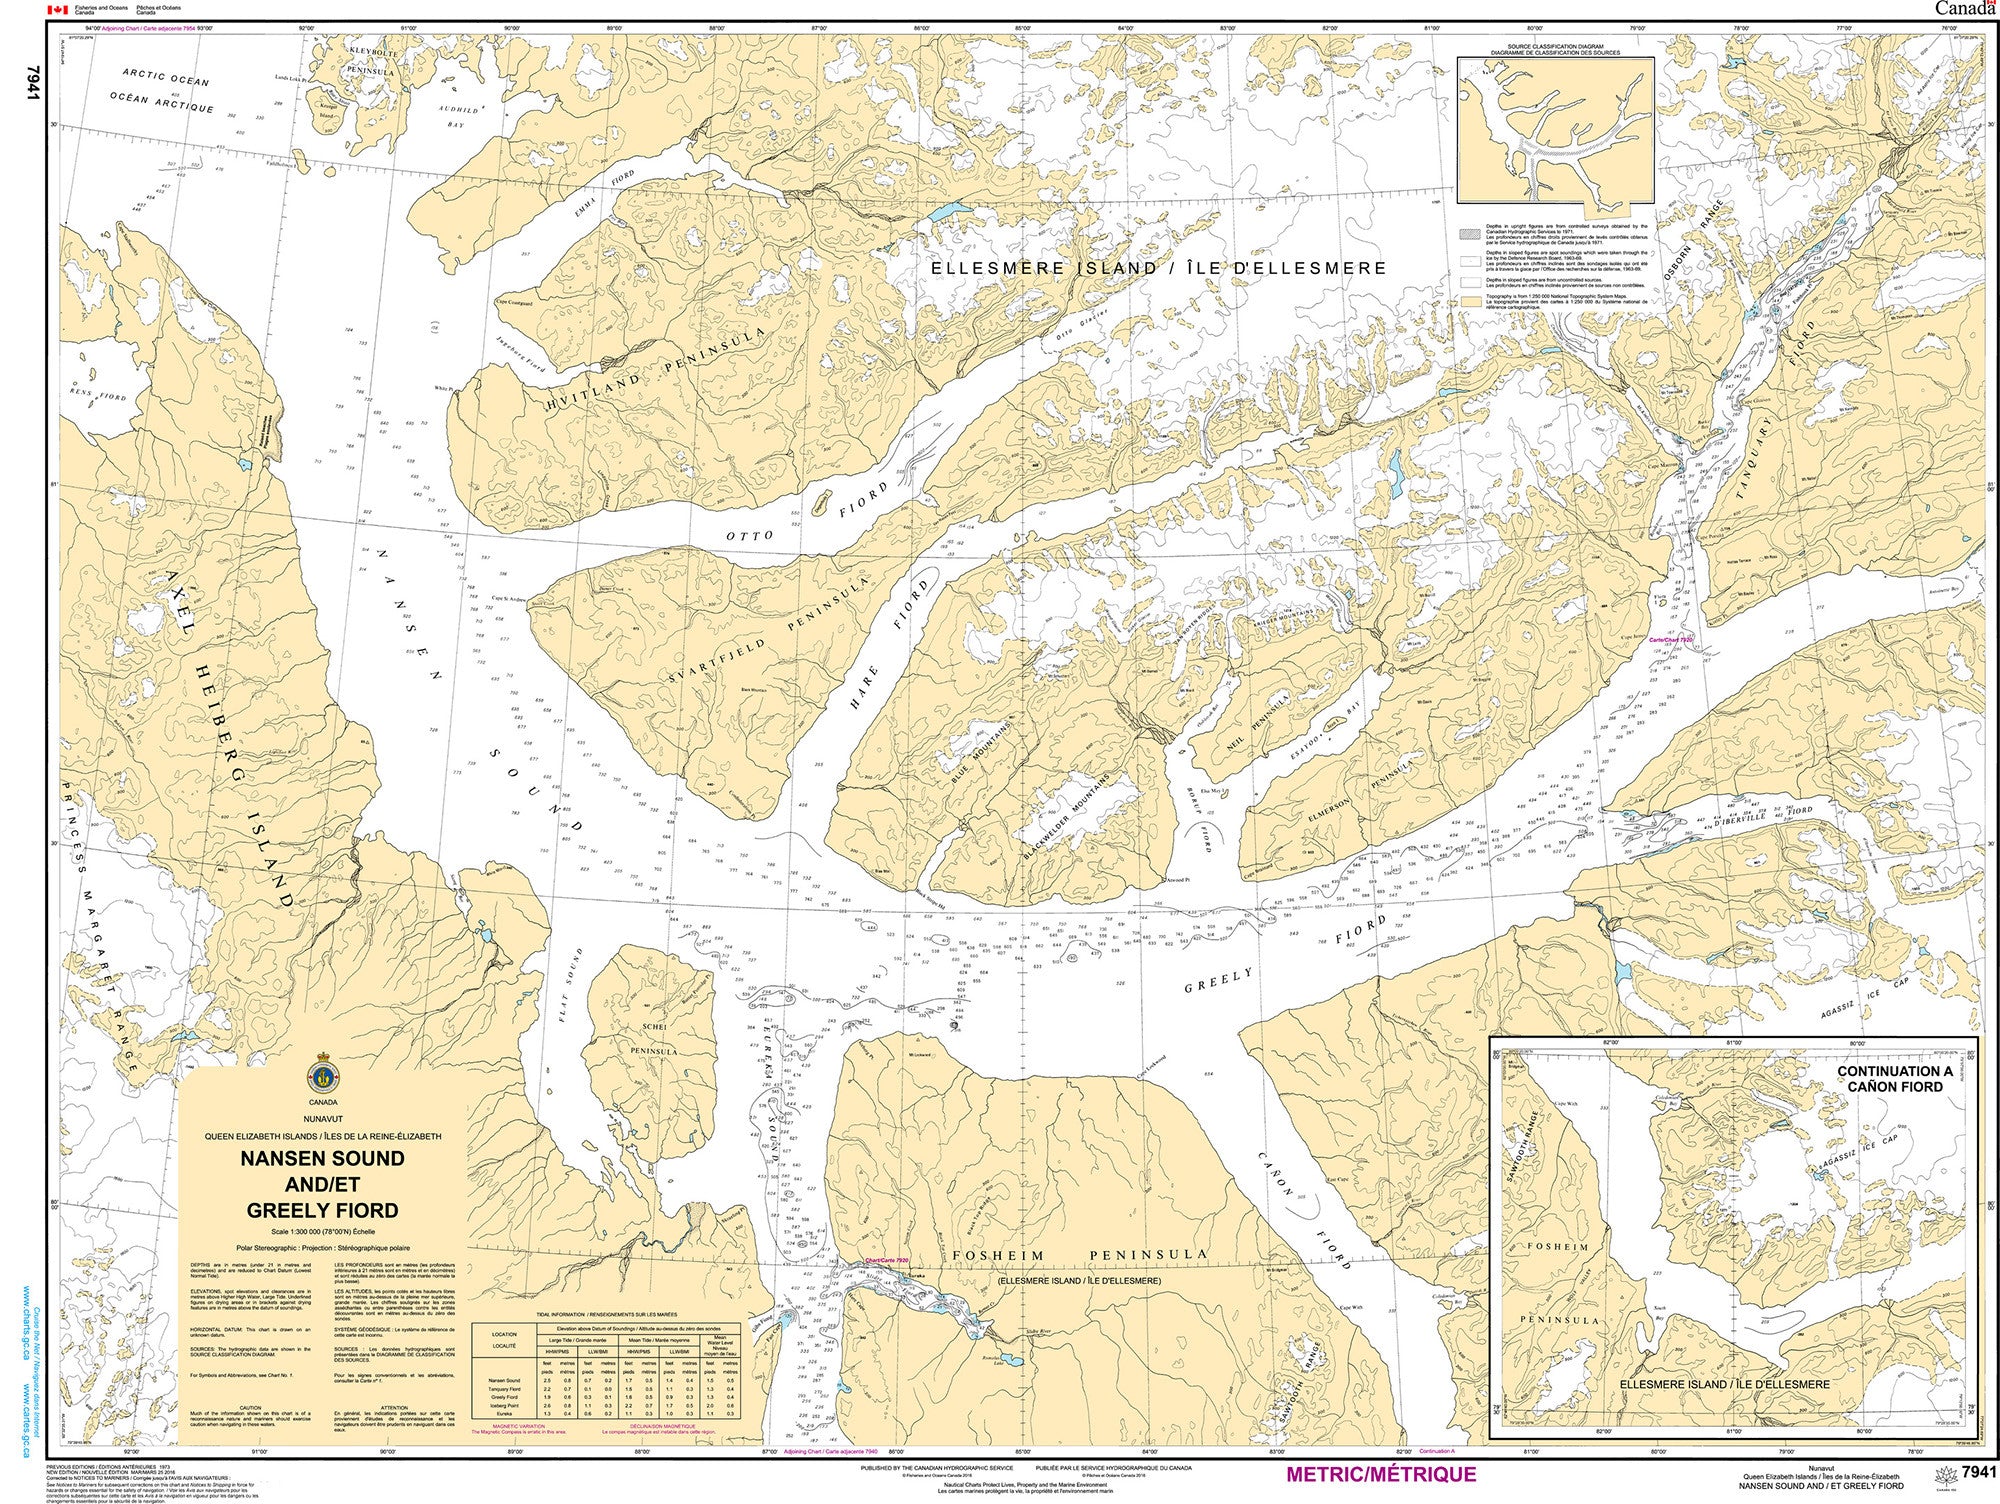 Canadian Hydrographic Service Nautical Chart CHS7941: Nansen Sound and Greely Fiord